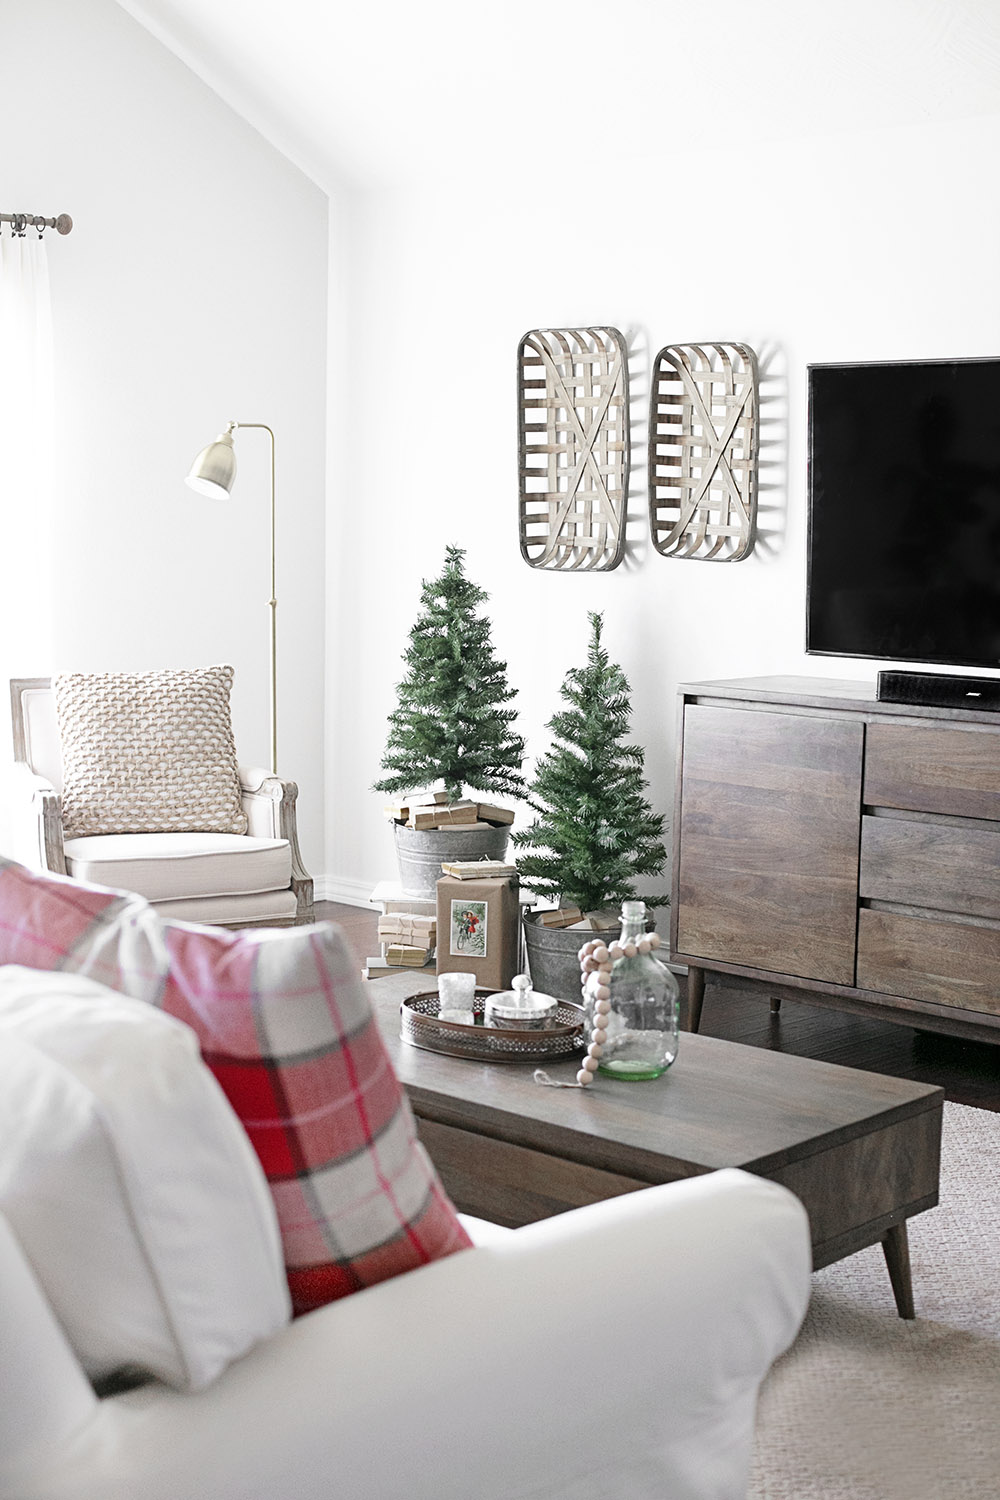 A living room with two small Christmas trees